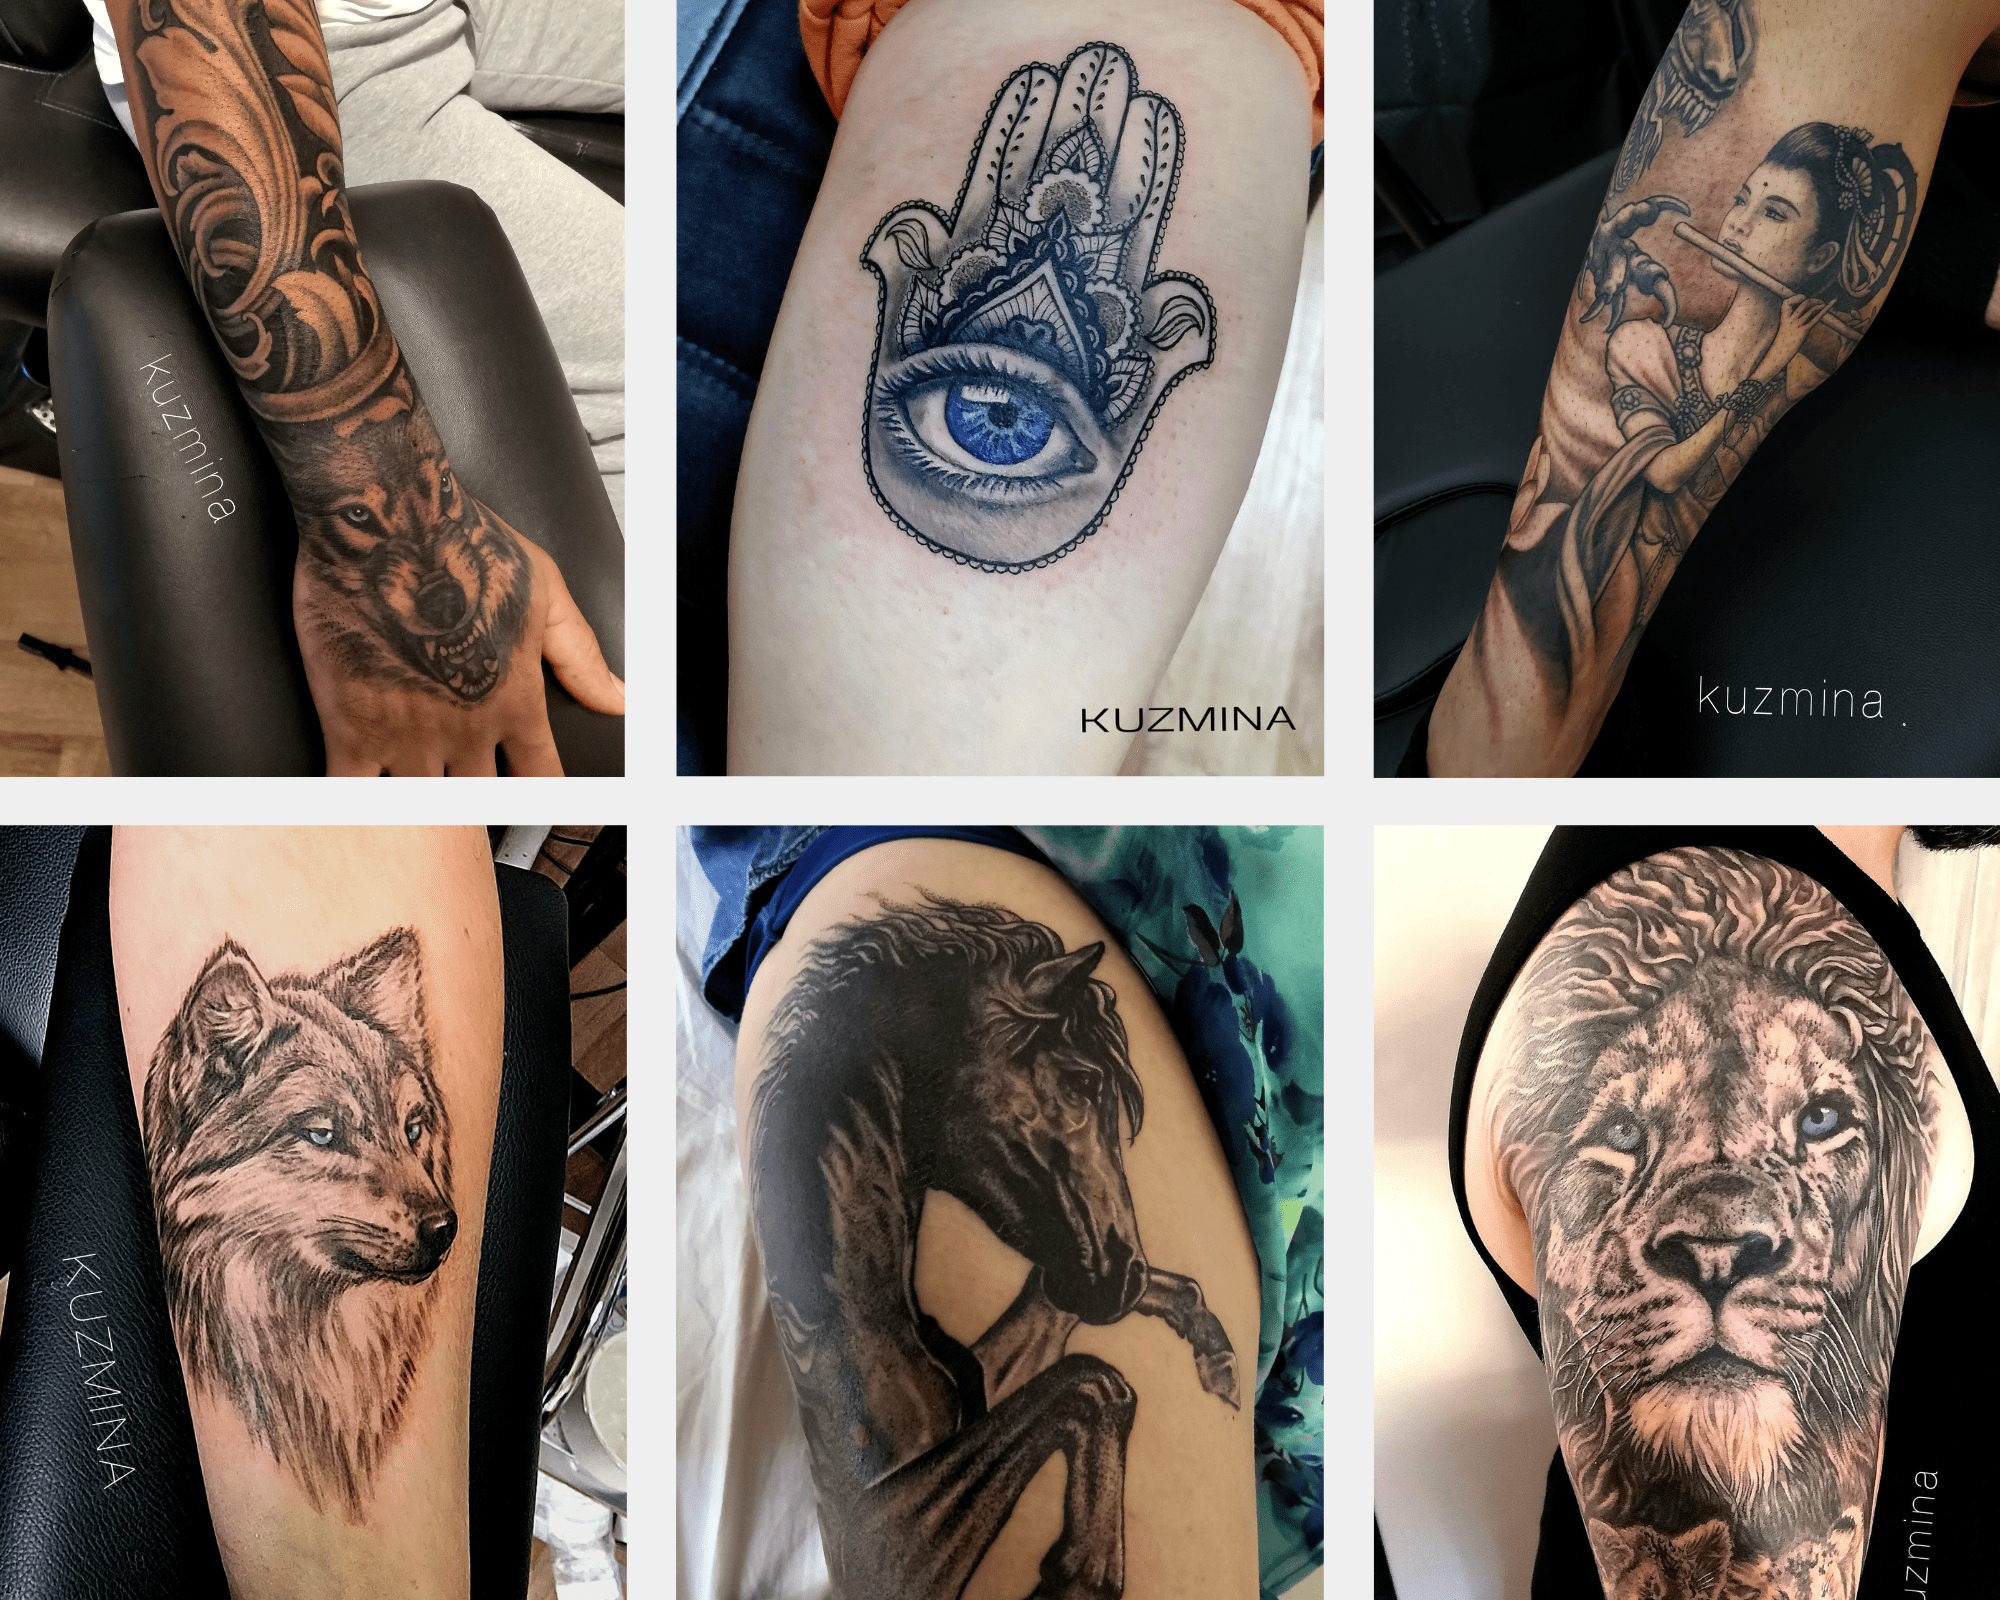 A collage of diverse tattoos by Helen Kuzmina, featuring a tiger, an eye in hamsa, a geisha, a wolf, a horse, and a lion's face.